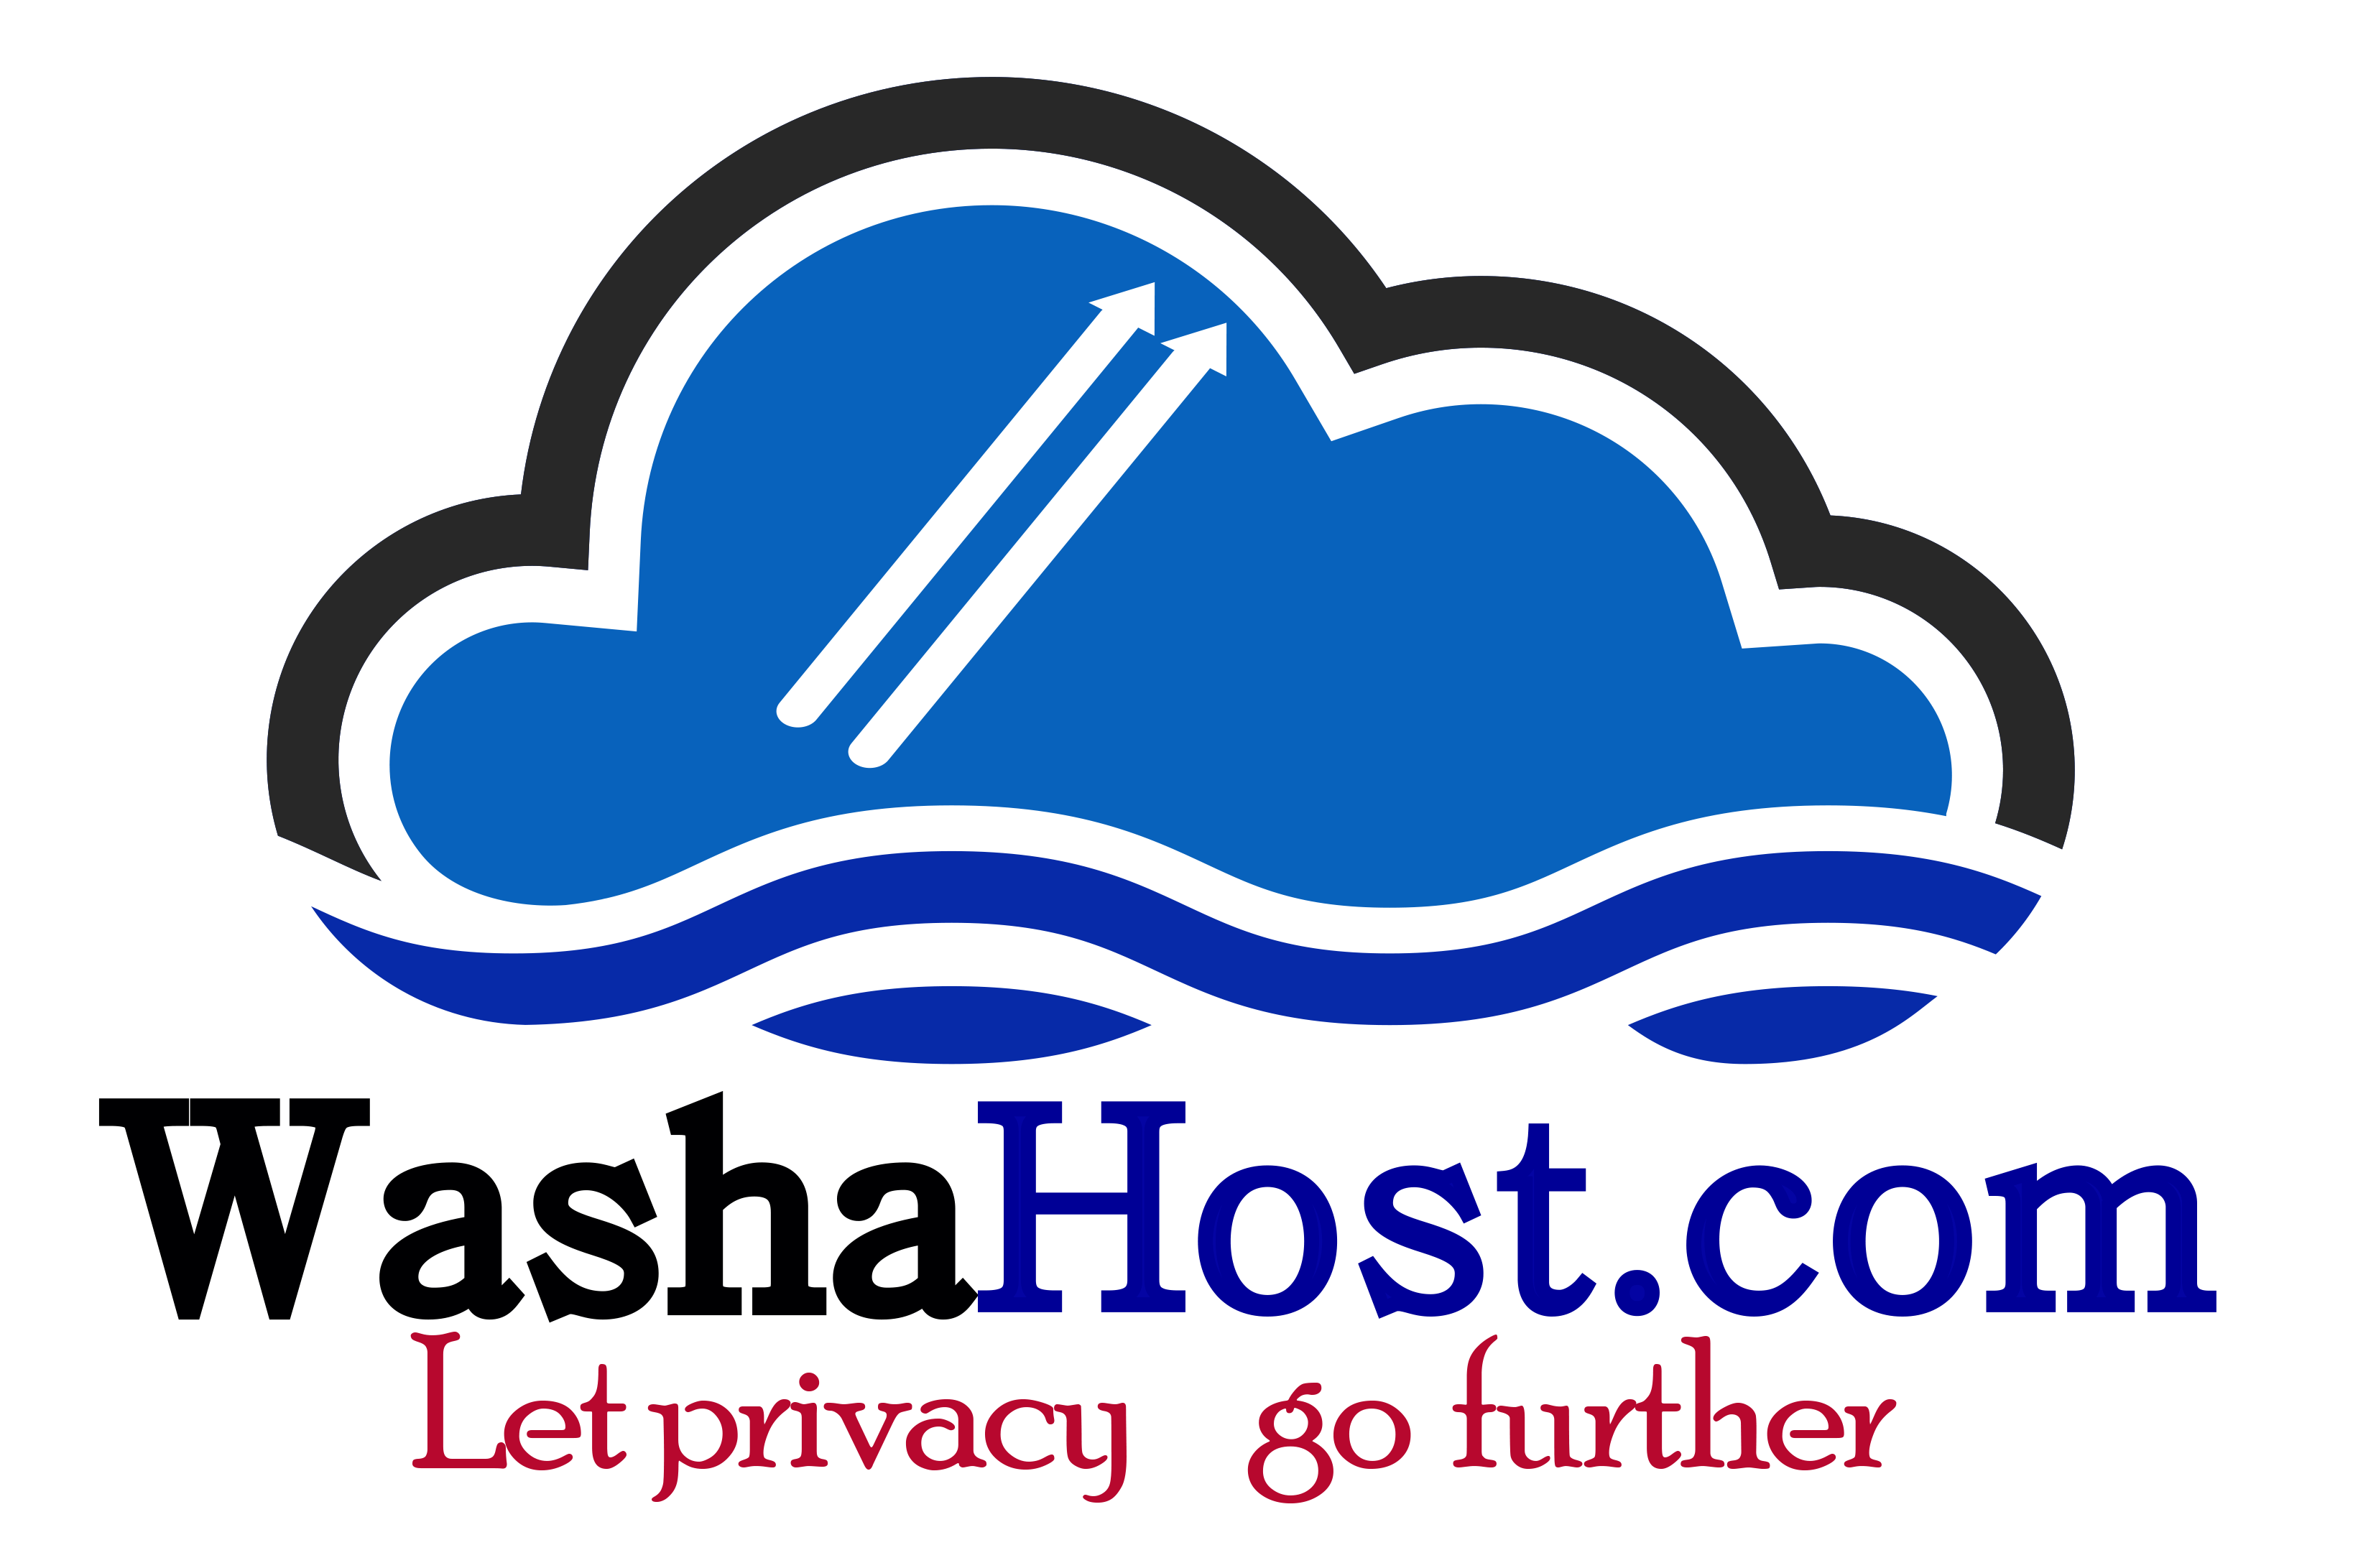 Rwanda's Top Web Hosting Providers for Affordable and Secure Websites."